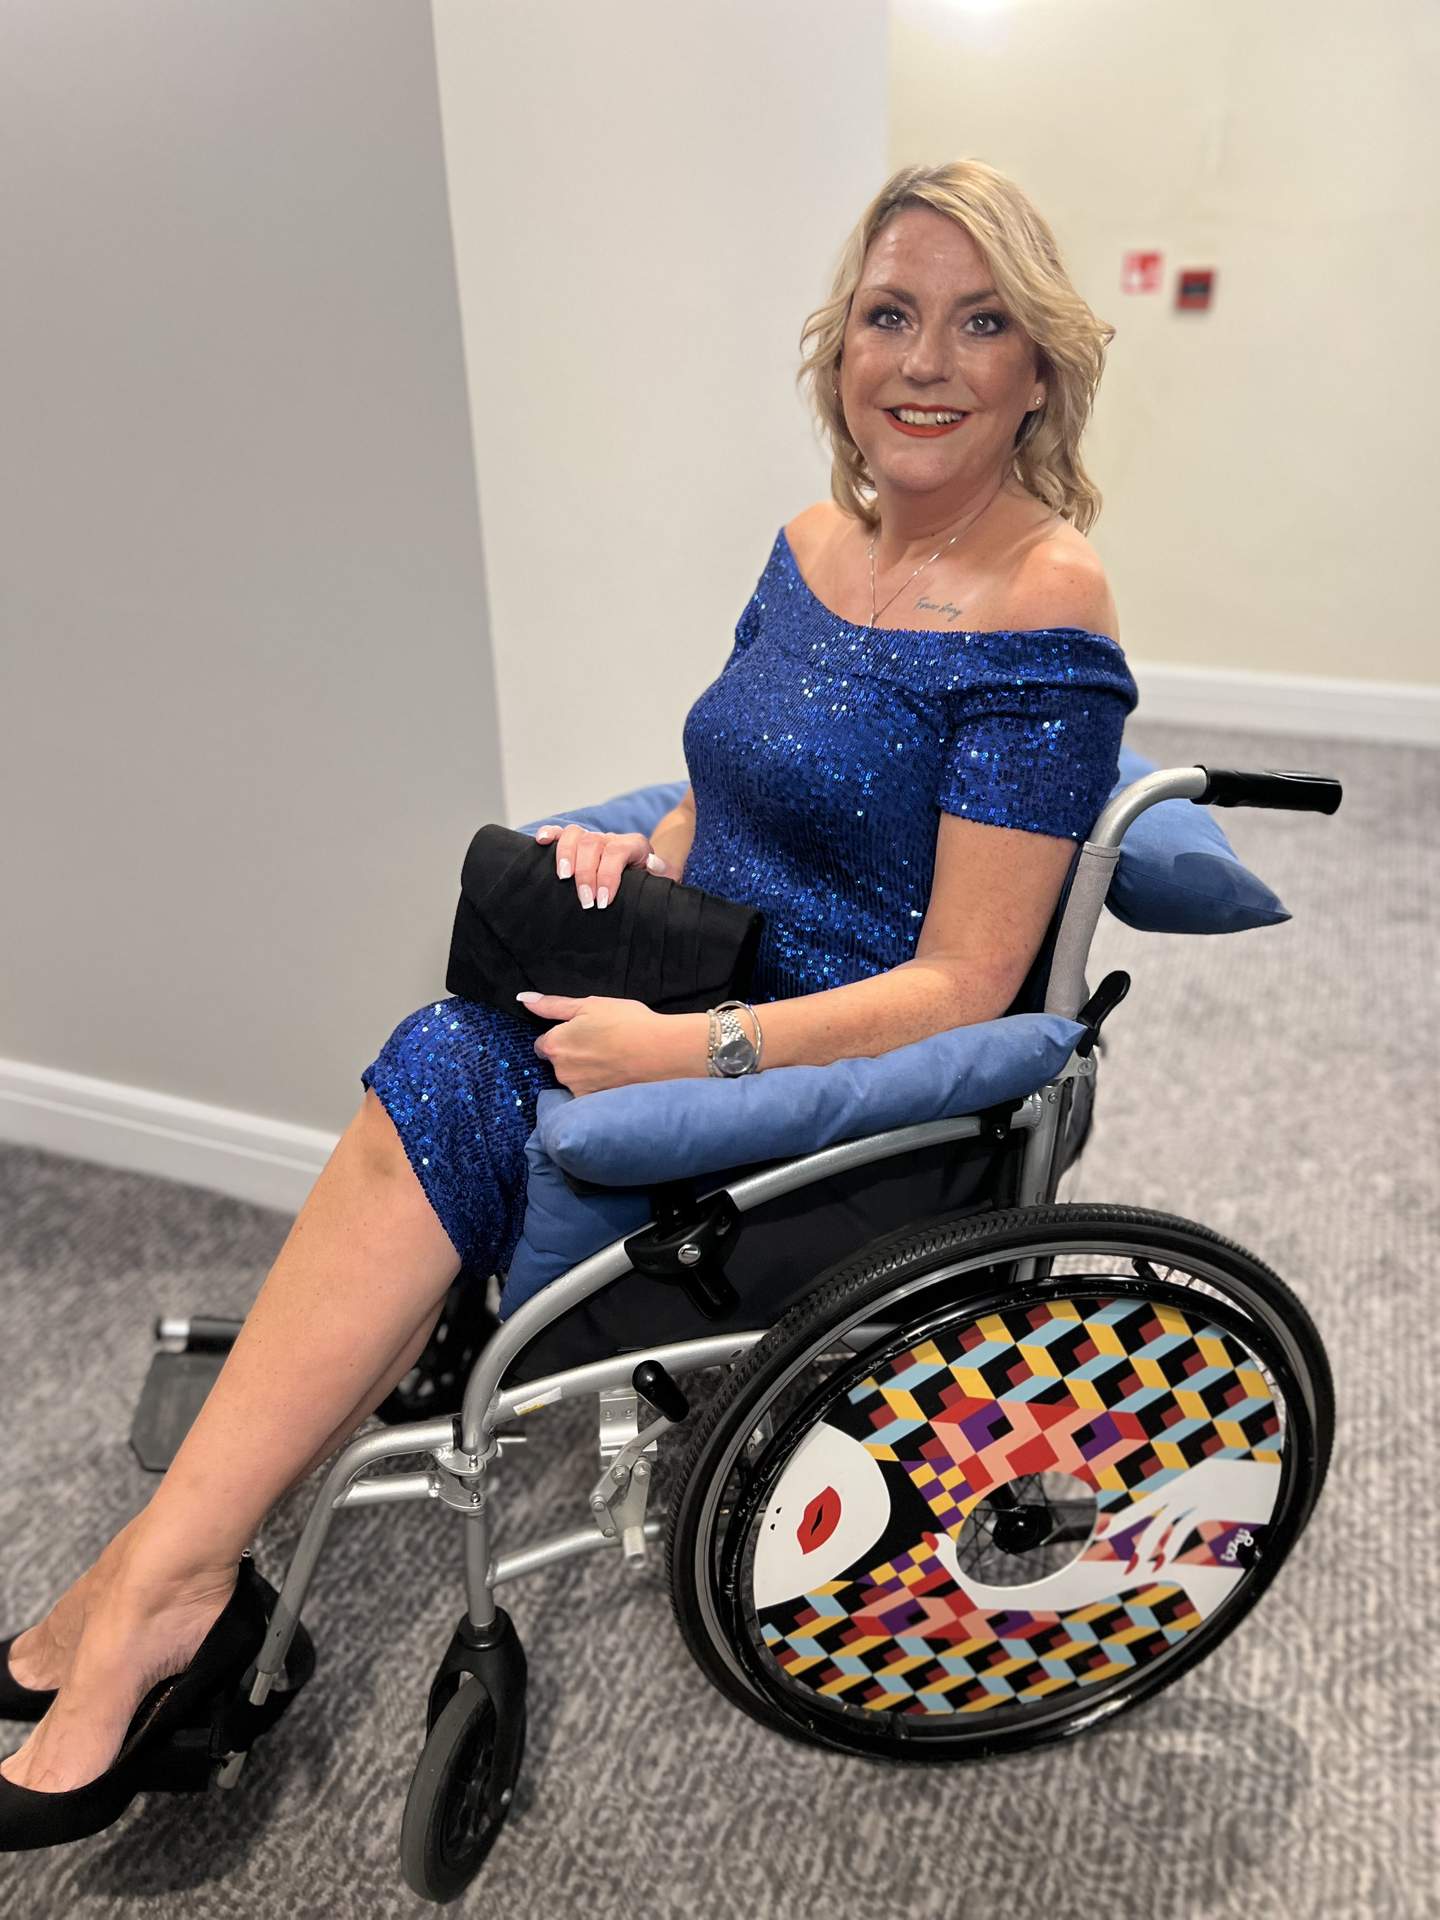 A picture of Jenn, who is a lady with blonde hair and is sat in a wheelchair wearing a sparkly blue dress. Her wheelchair has her designer spoke covers on from Izzy Wheels.